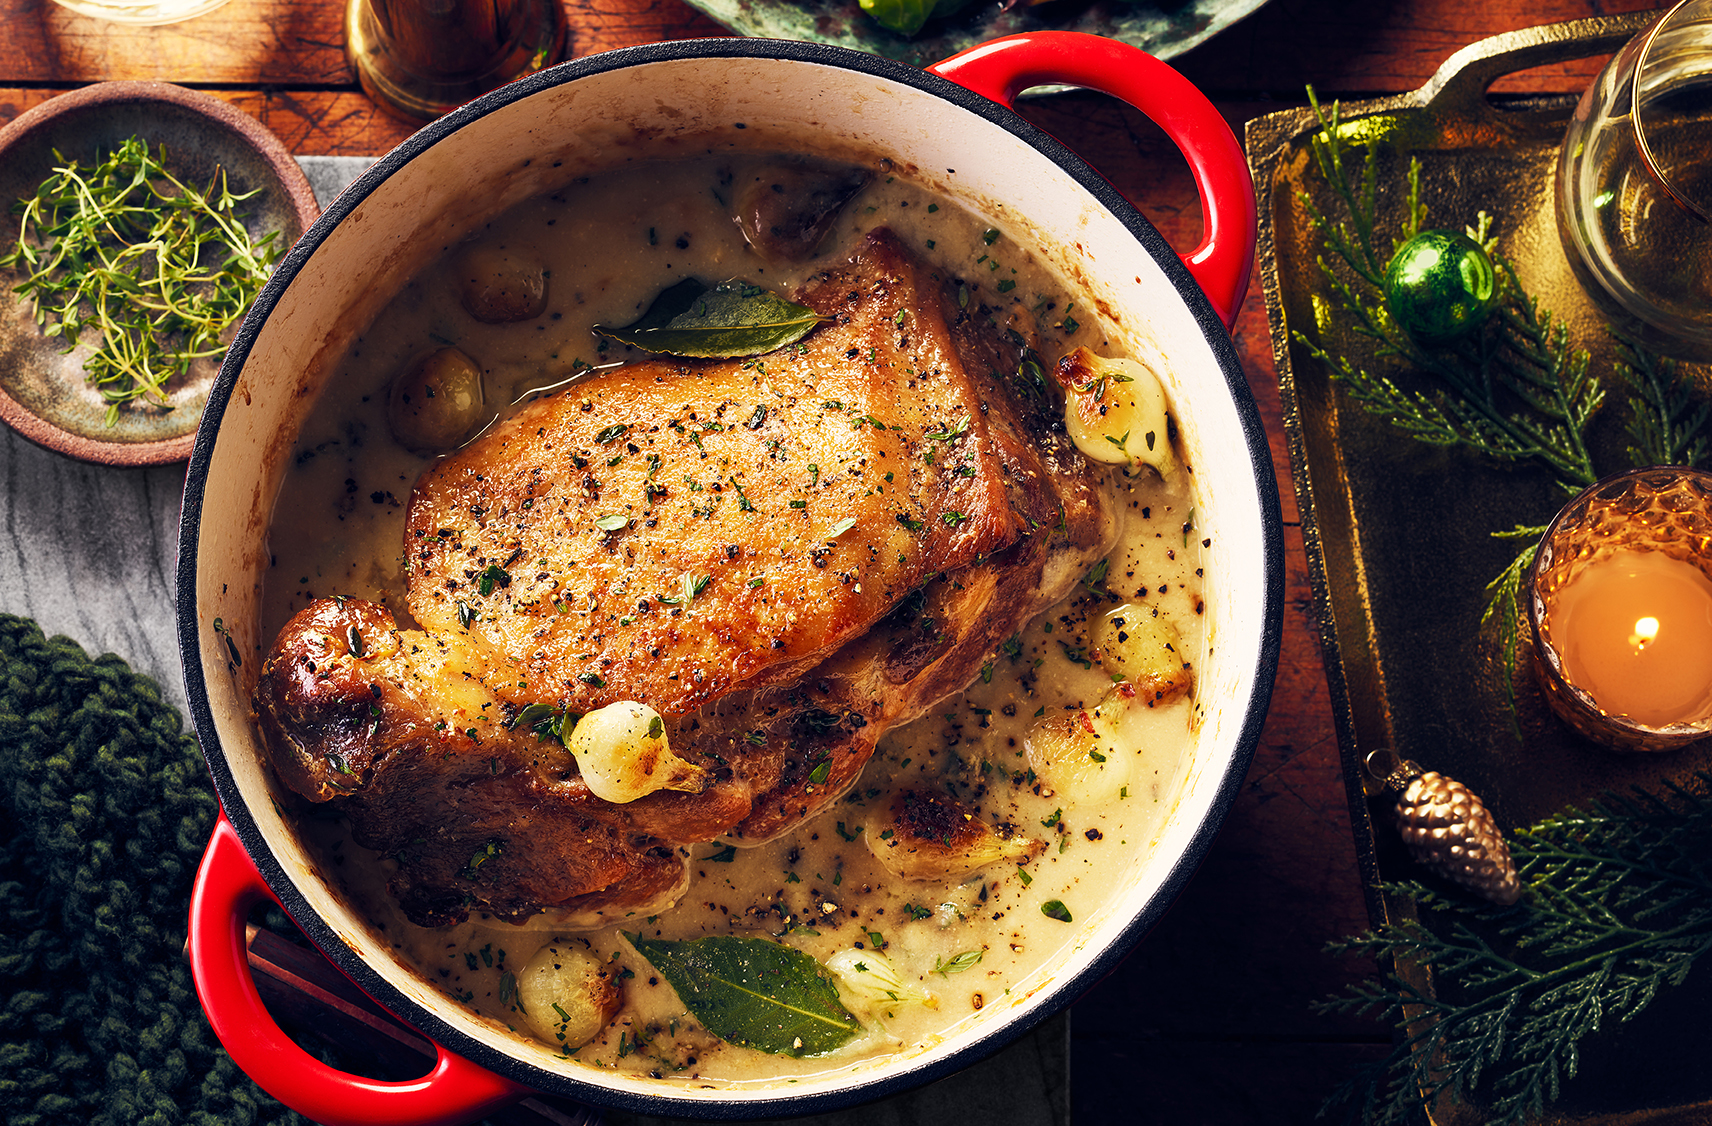 A casserole dish cradles crisped pork shoulder with herbs and a creamy sauce